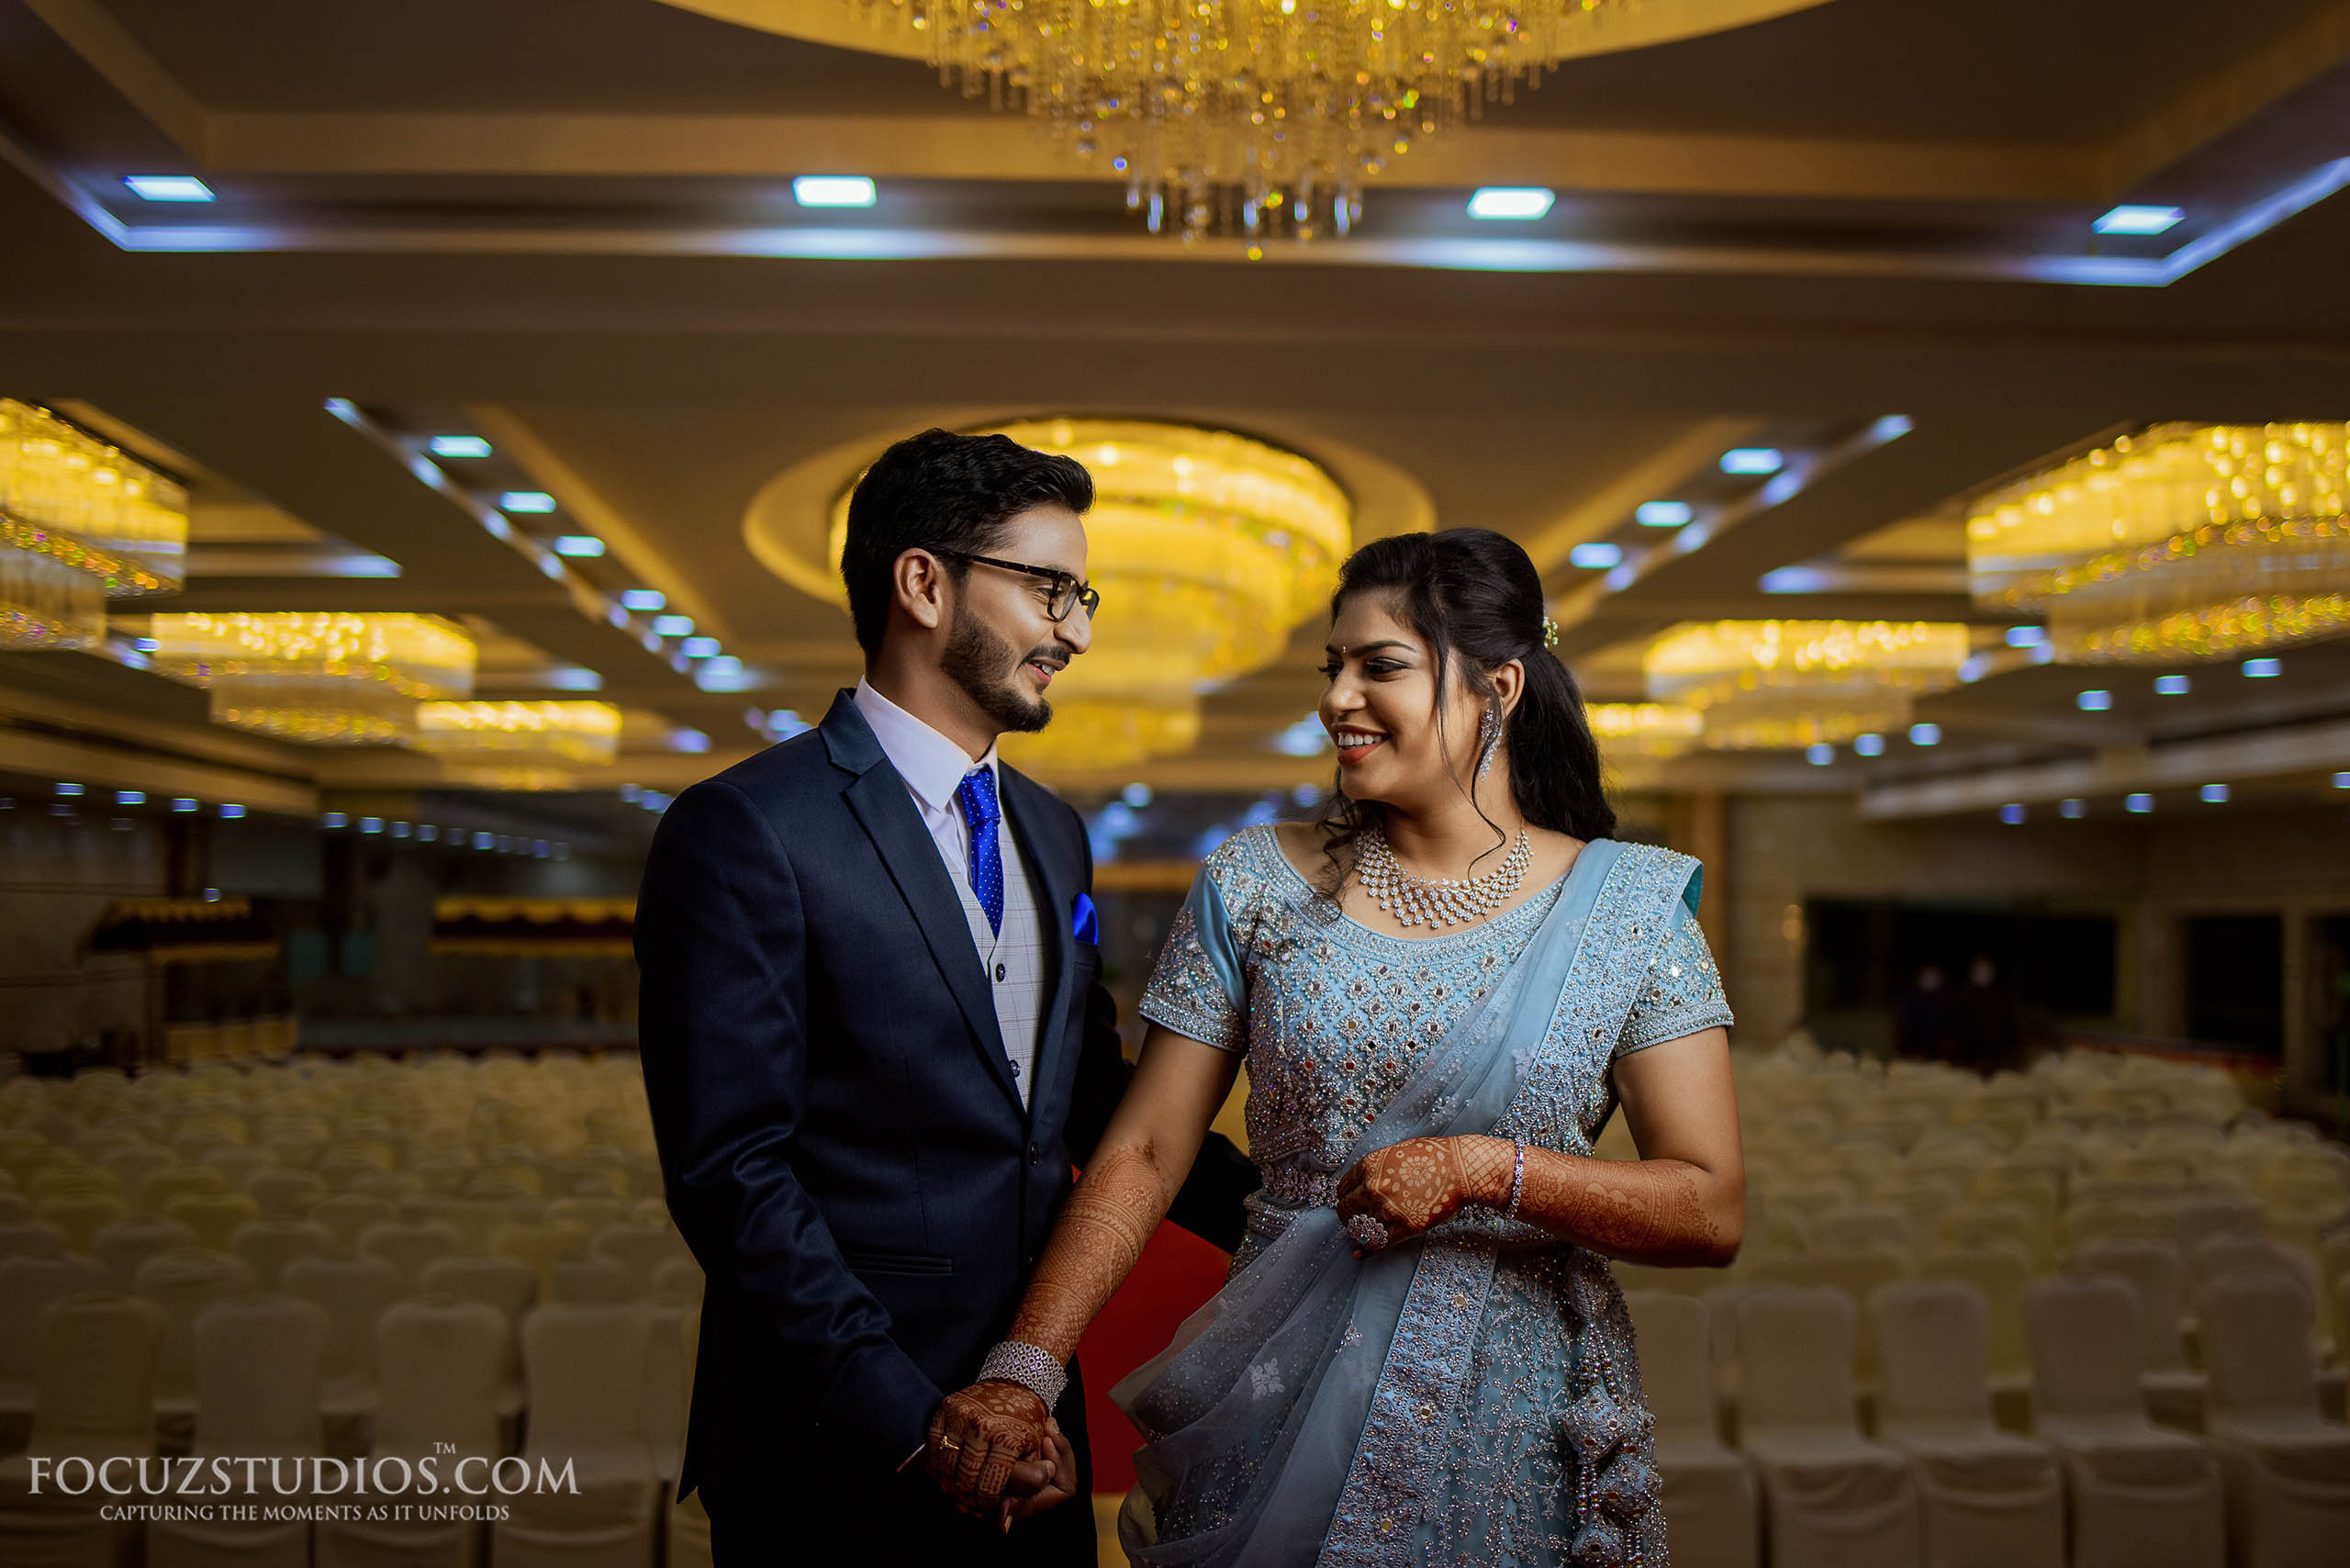 top-professional-wedding-photography-services-chennai-35